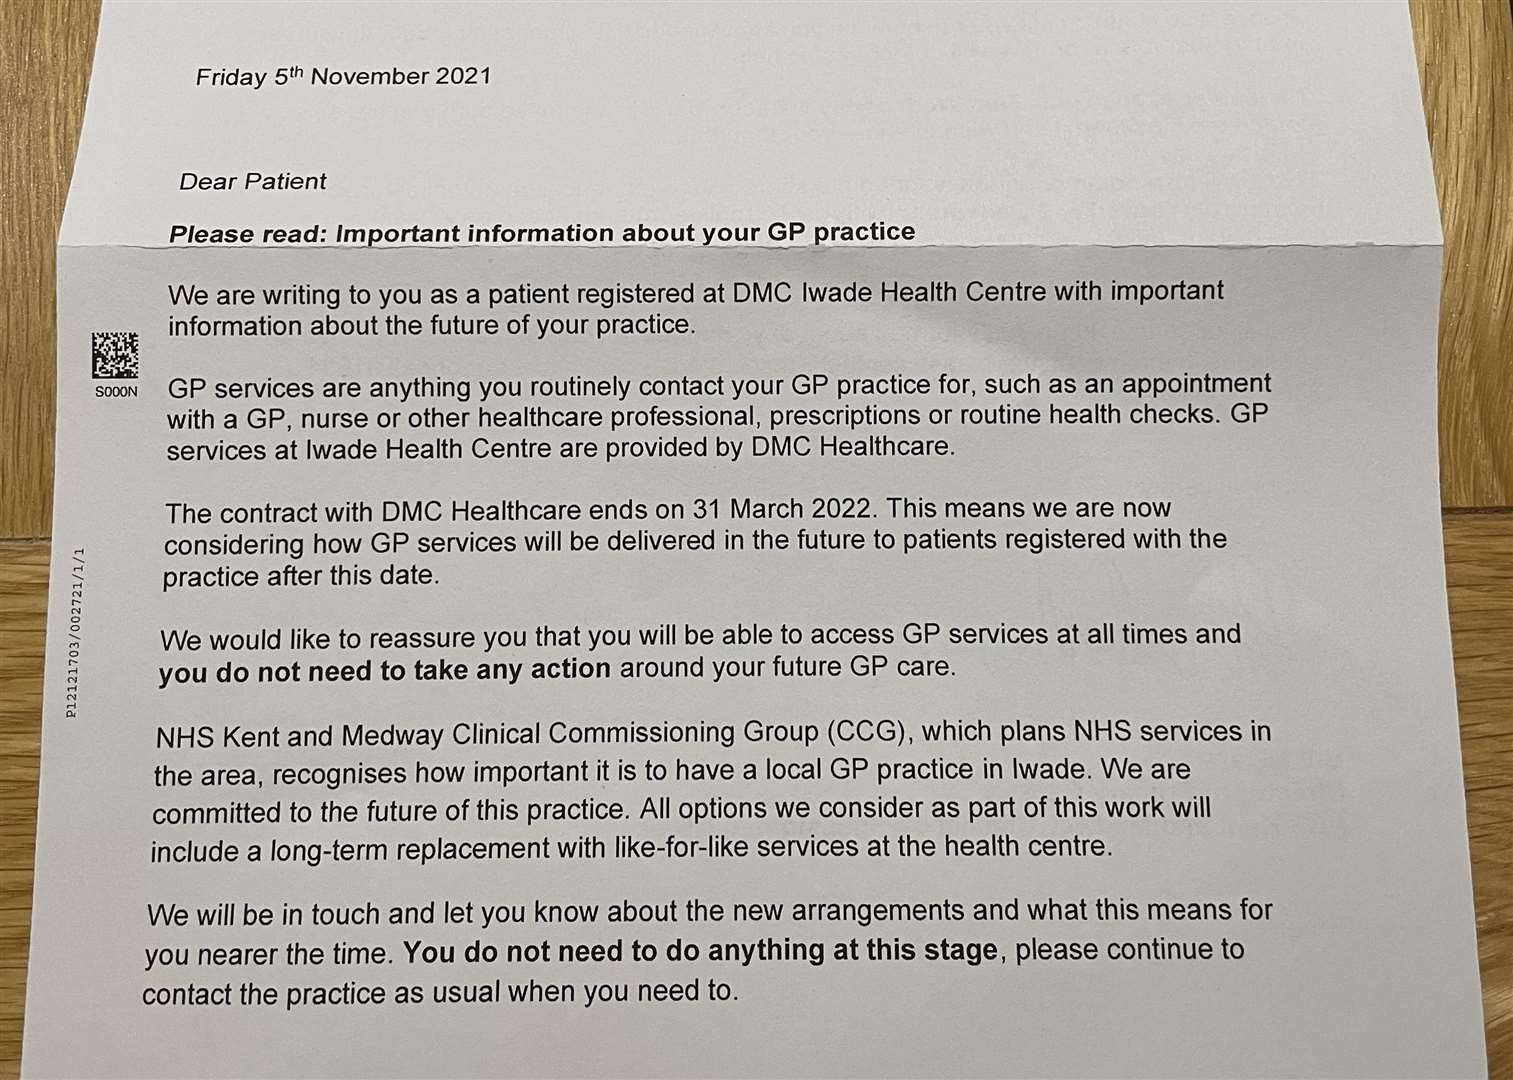 The NHS Kent and Medway CCG has written to patients to say its contract with DMC Healthcare will end in March